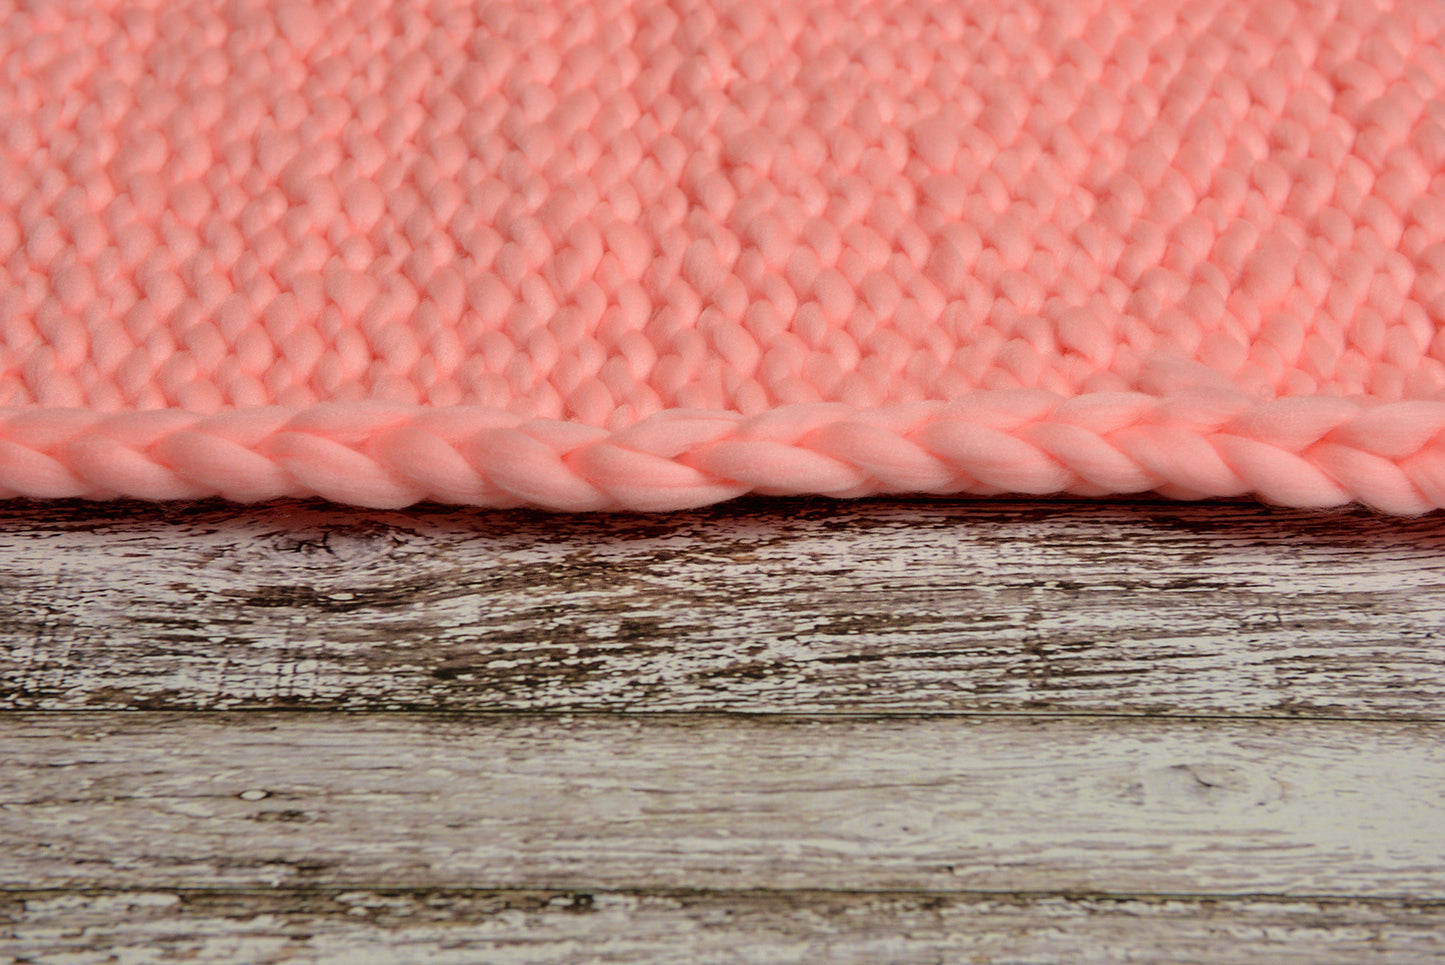 Knitted Thick Yarn Blanket - Pink-Newborn Photography Props